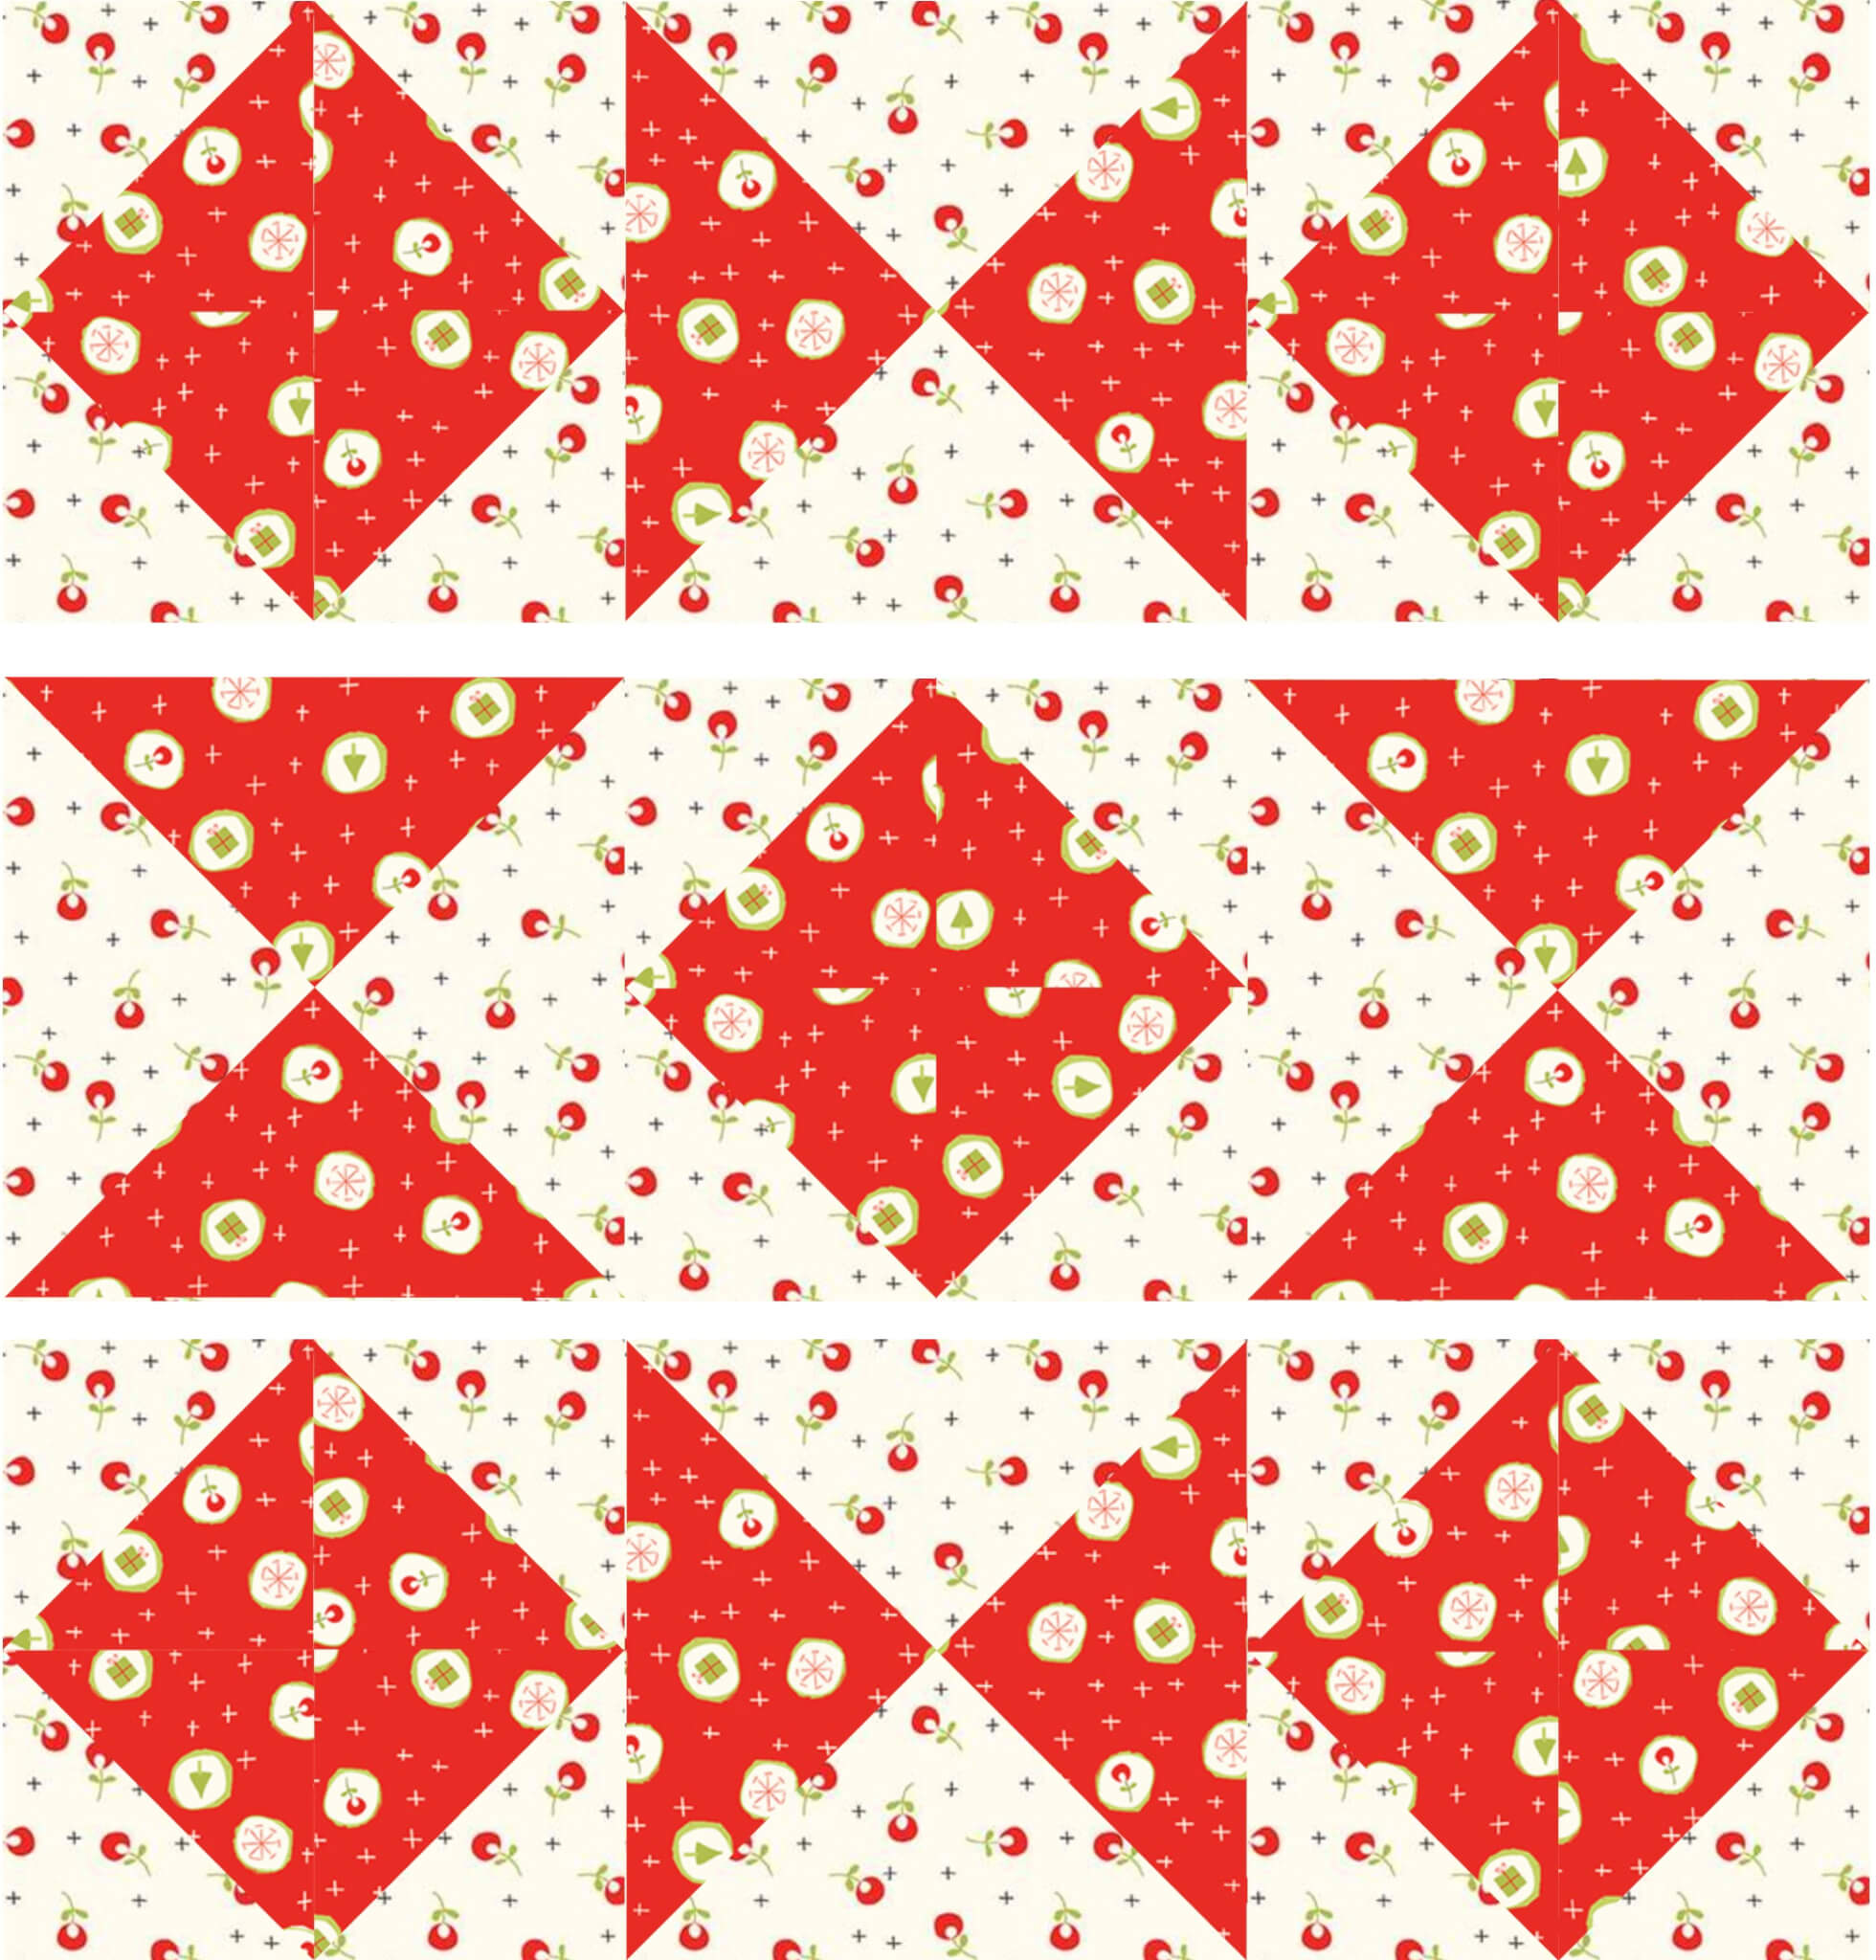 August 2021 NZP Block Of The Month Combination Star Quilt Block